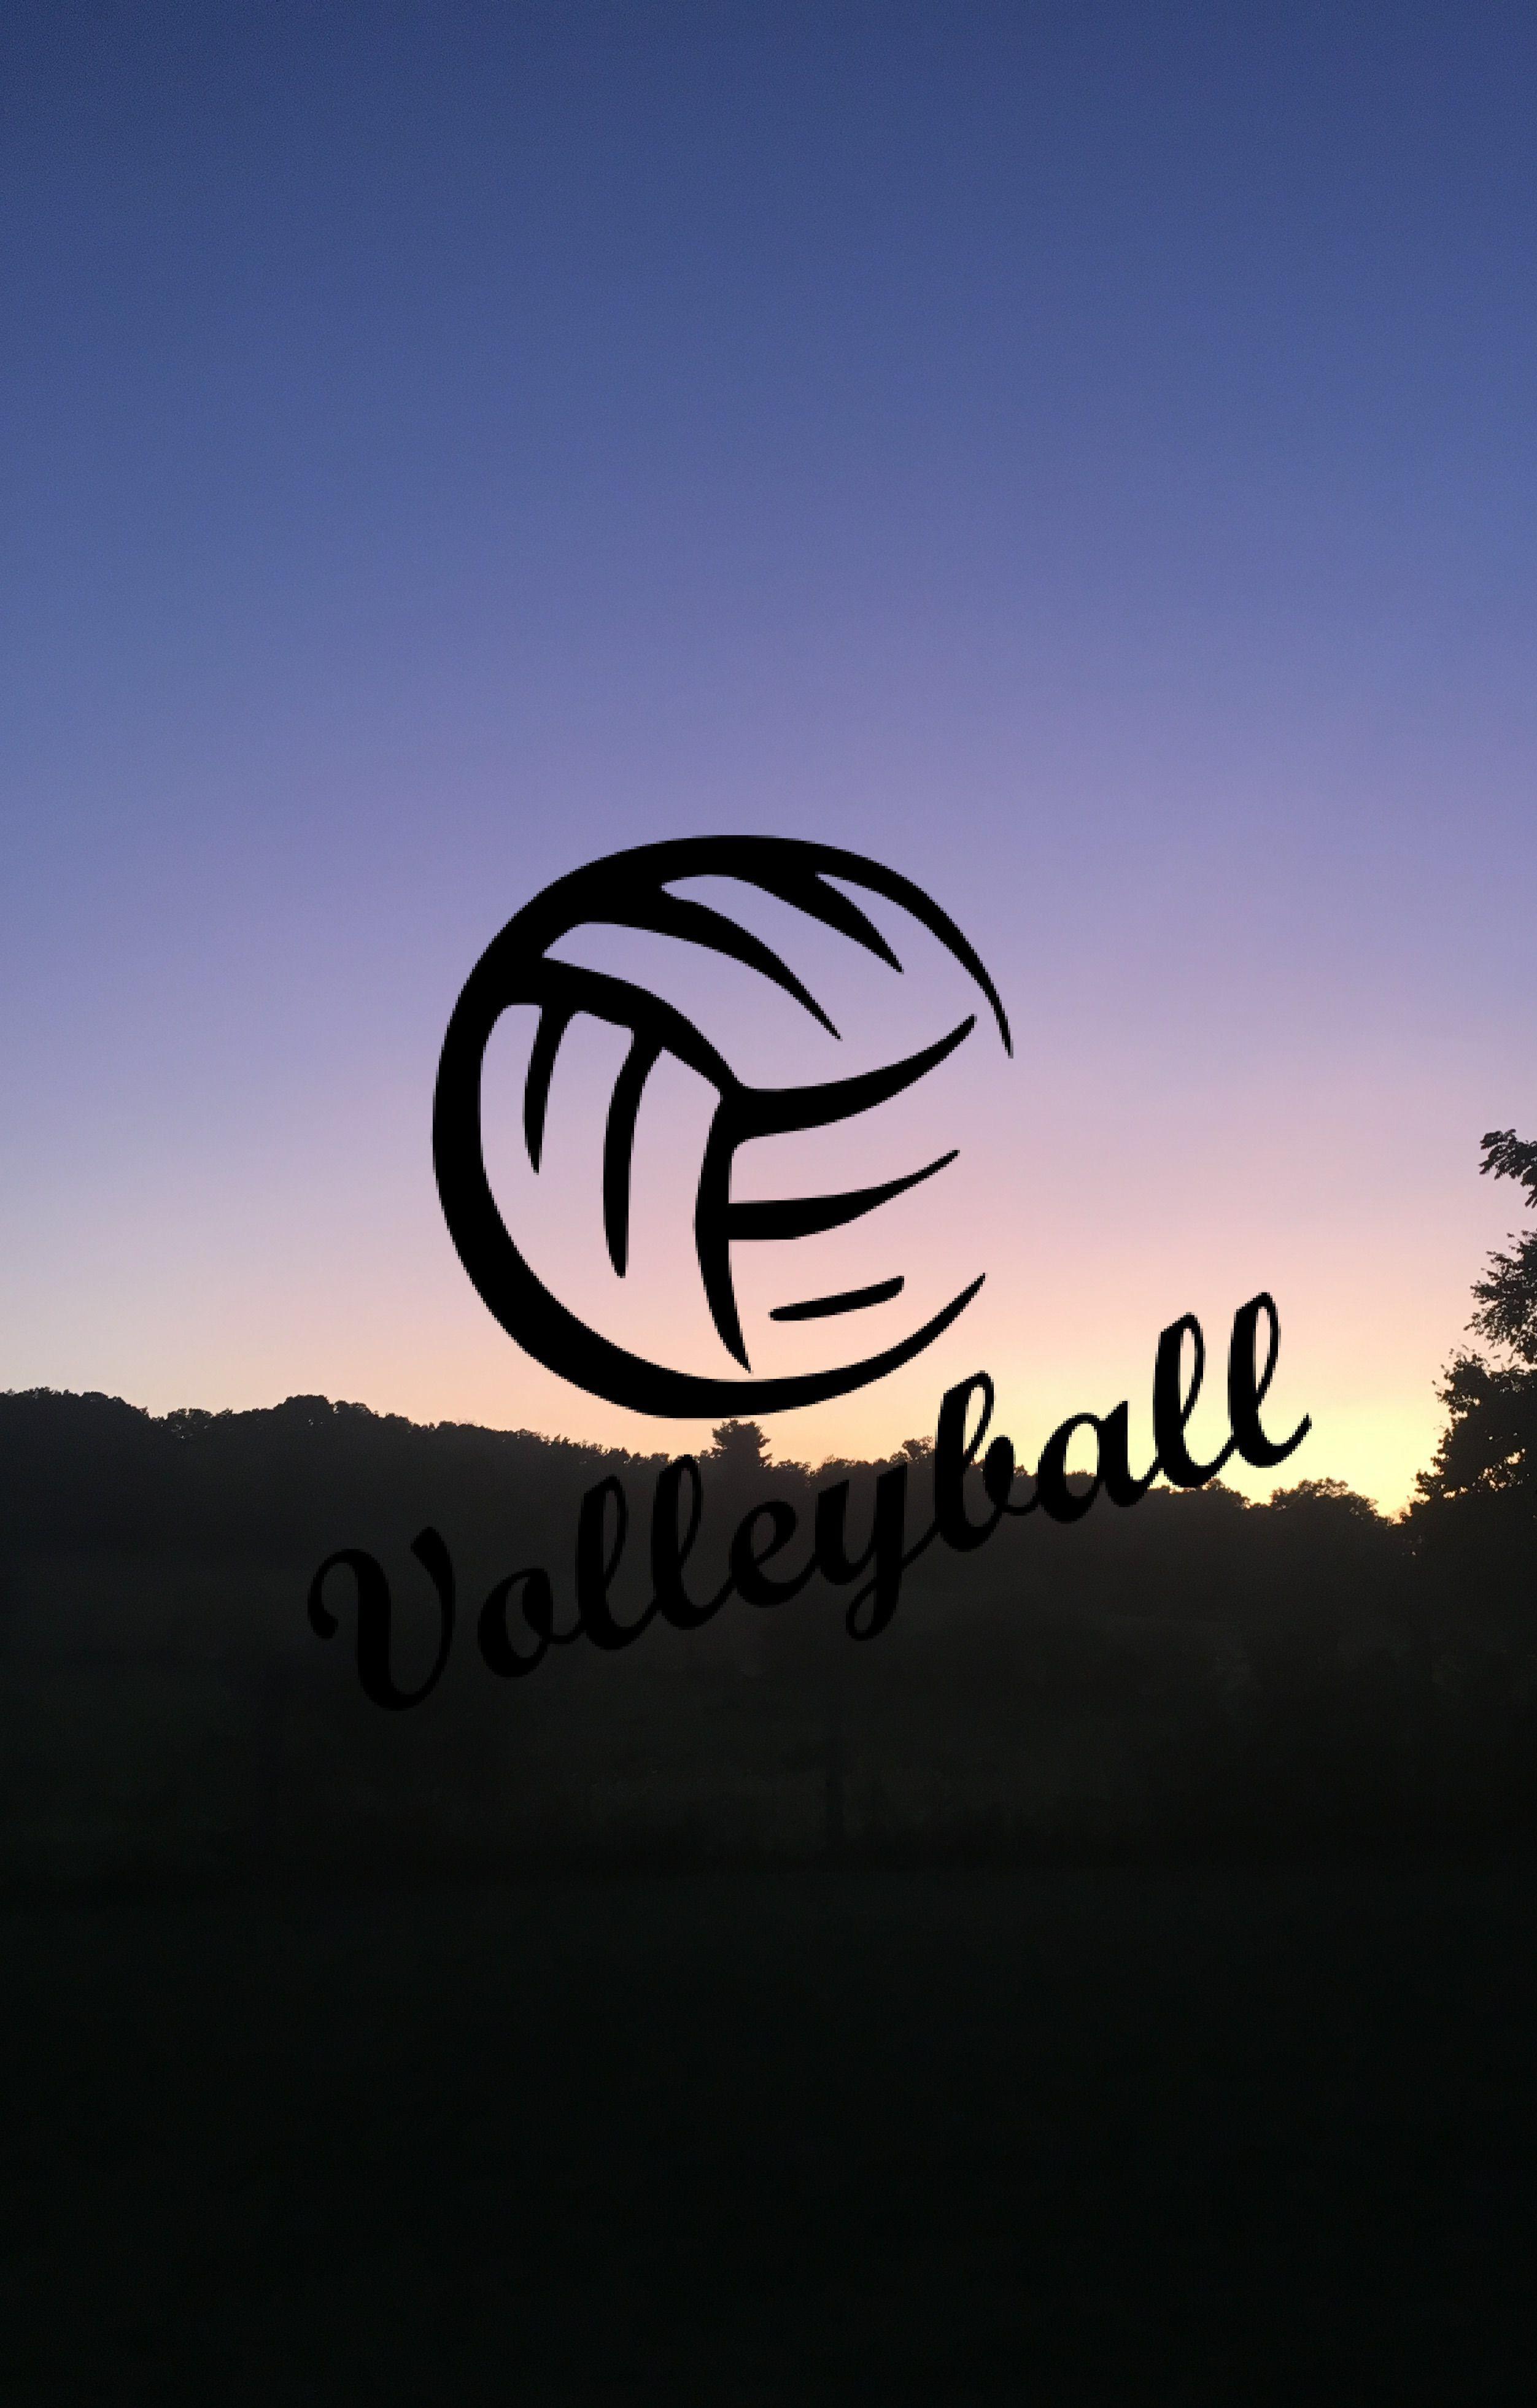 Quotes. Volleyball wallpaper, Volleyball